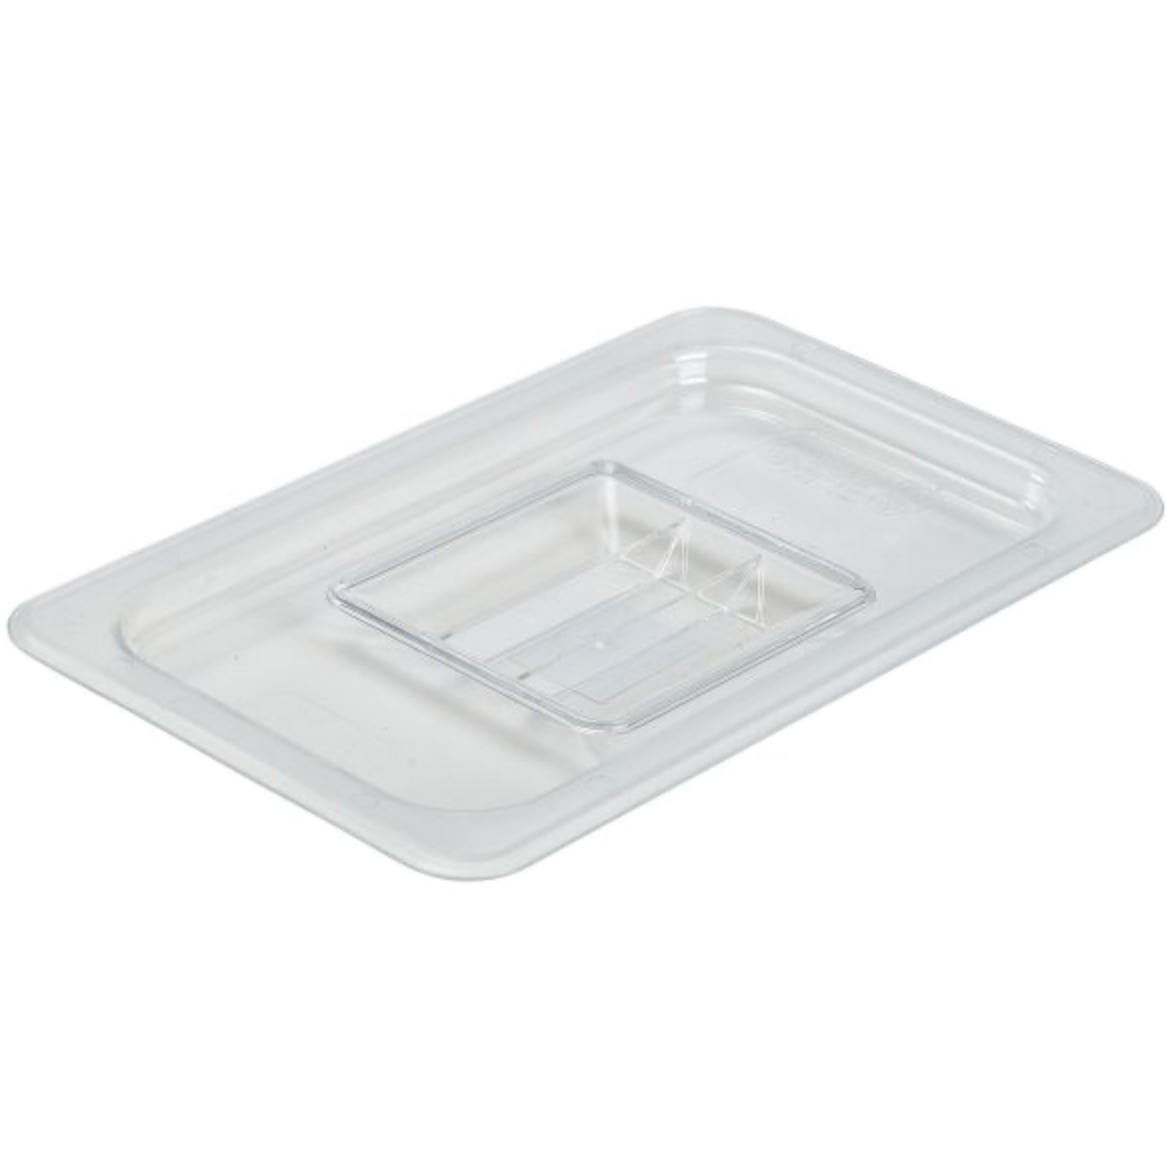 GenWare 1/4 - Polycarbonate GN Lid Clear